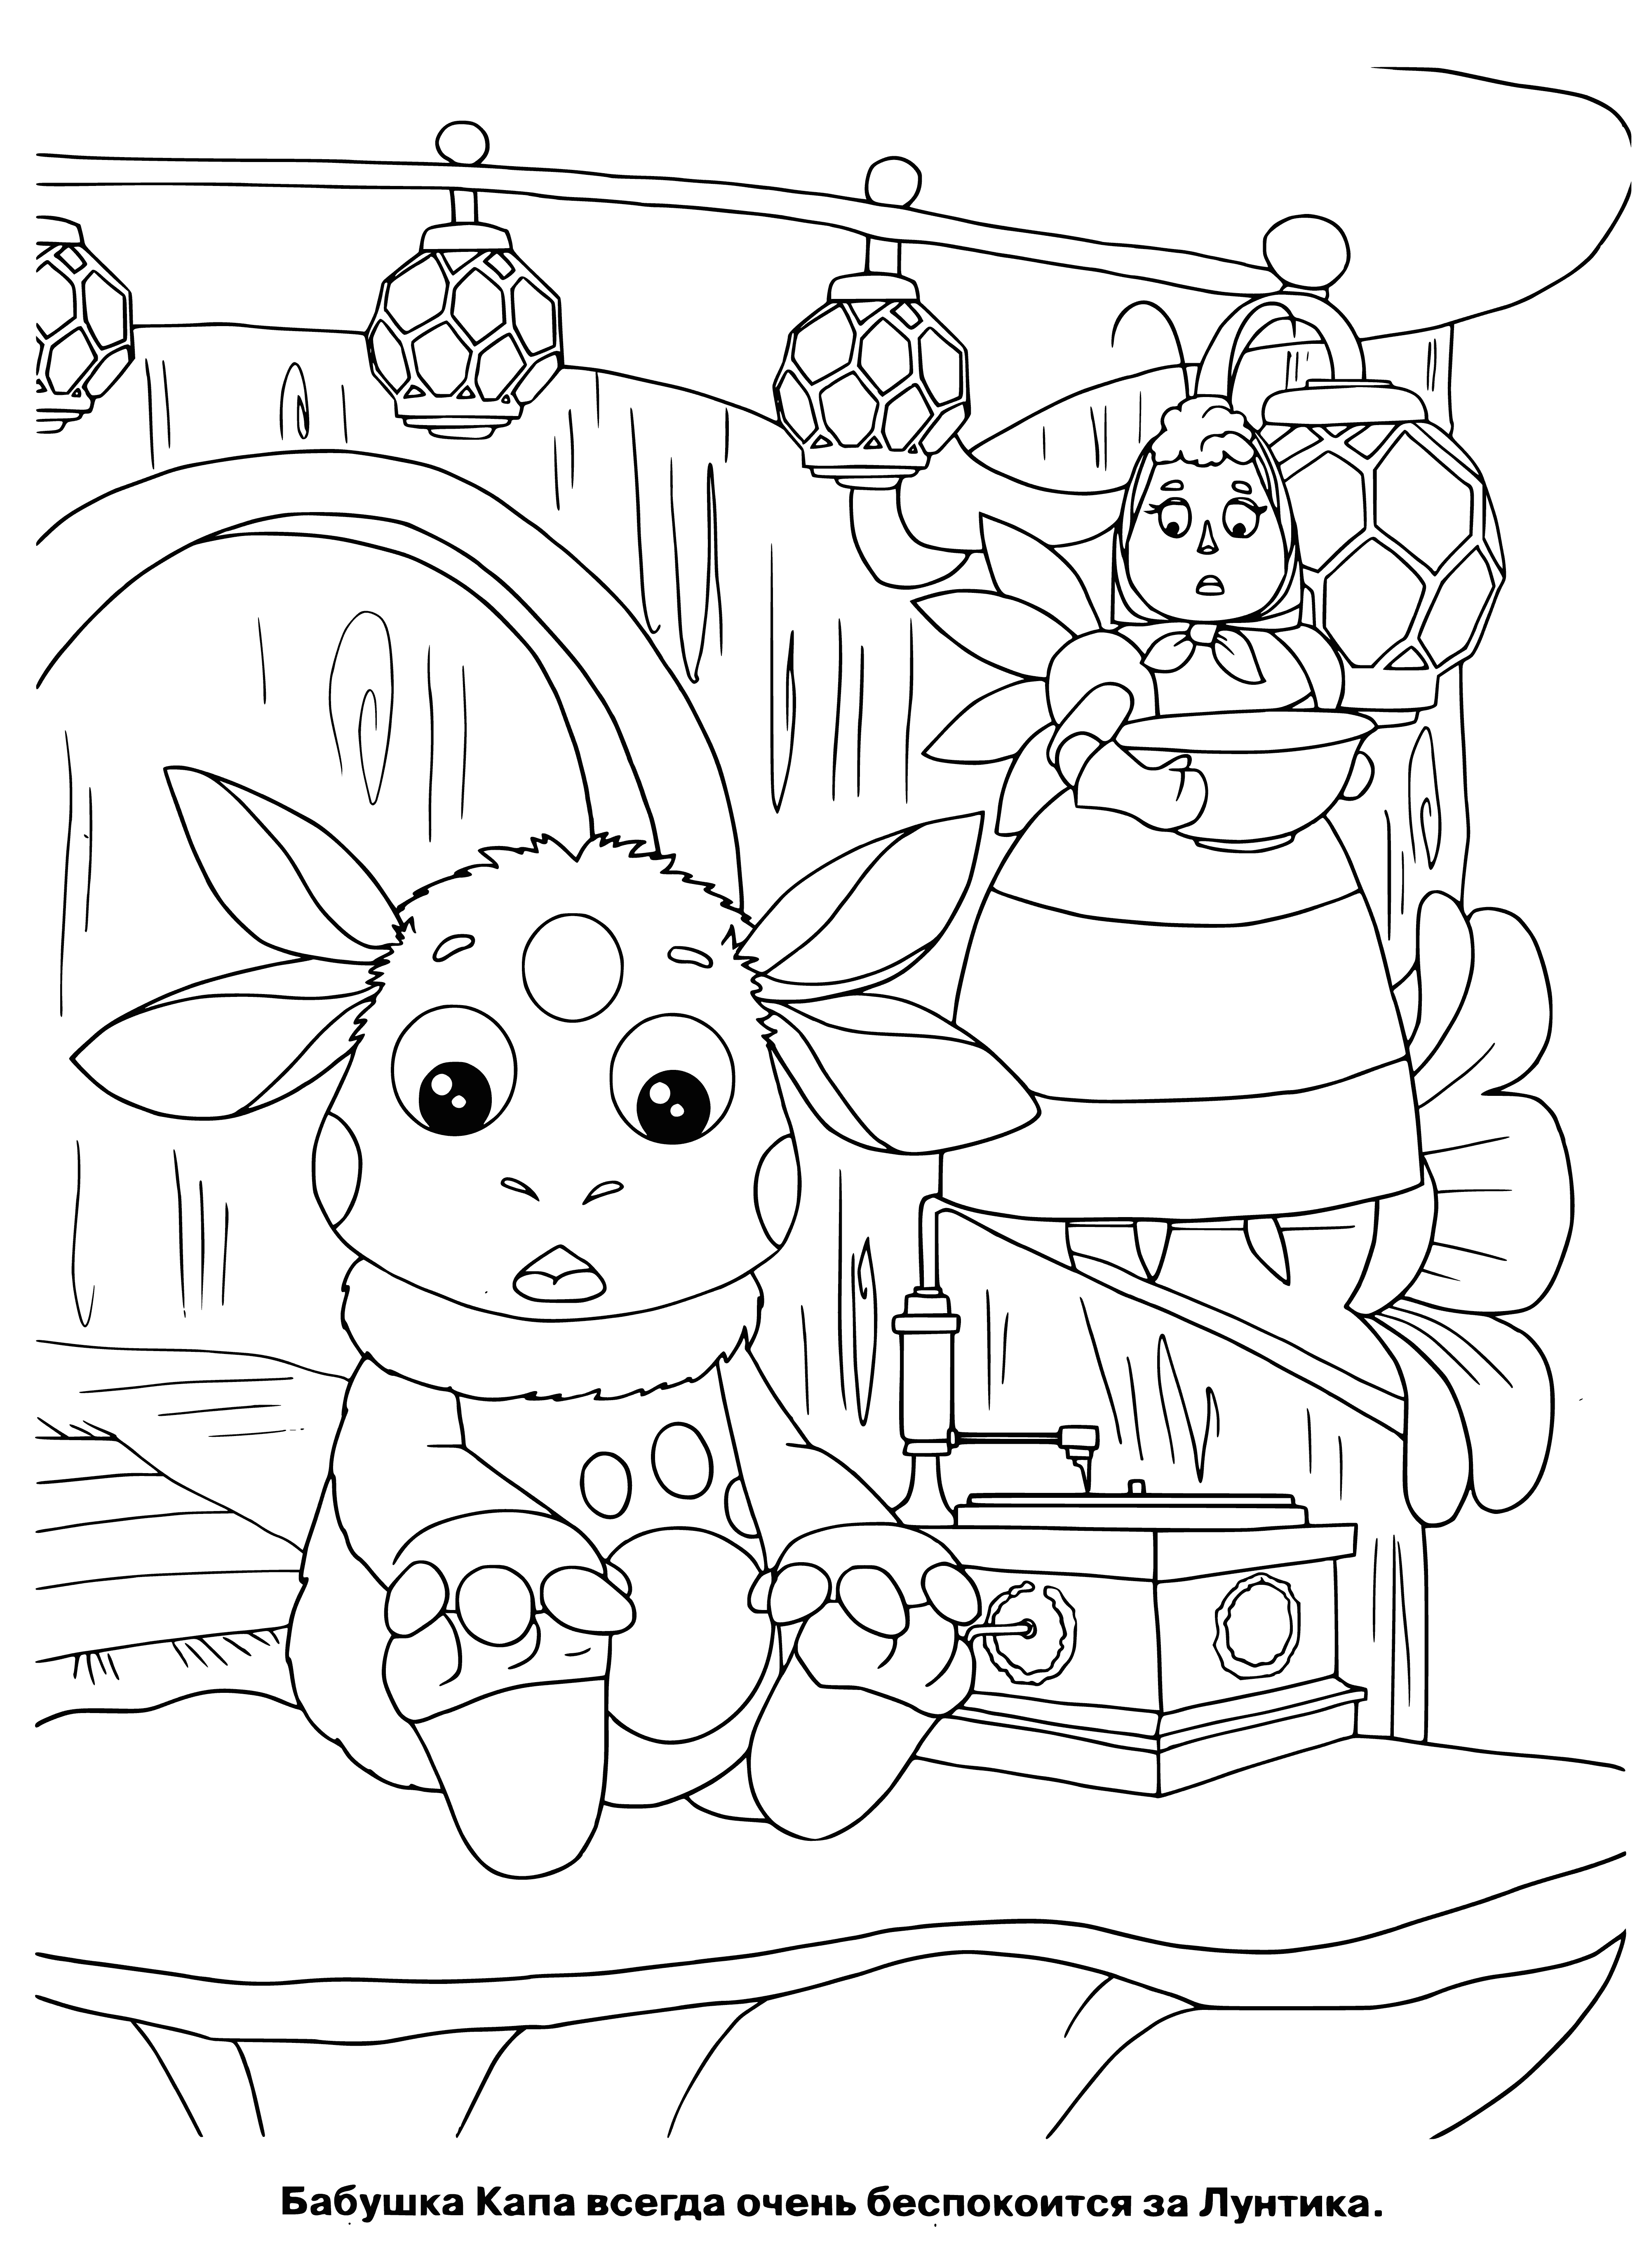 coloring page: Luntik and two friends of different colors are enjoying some music together.